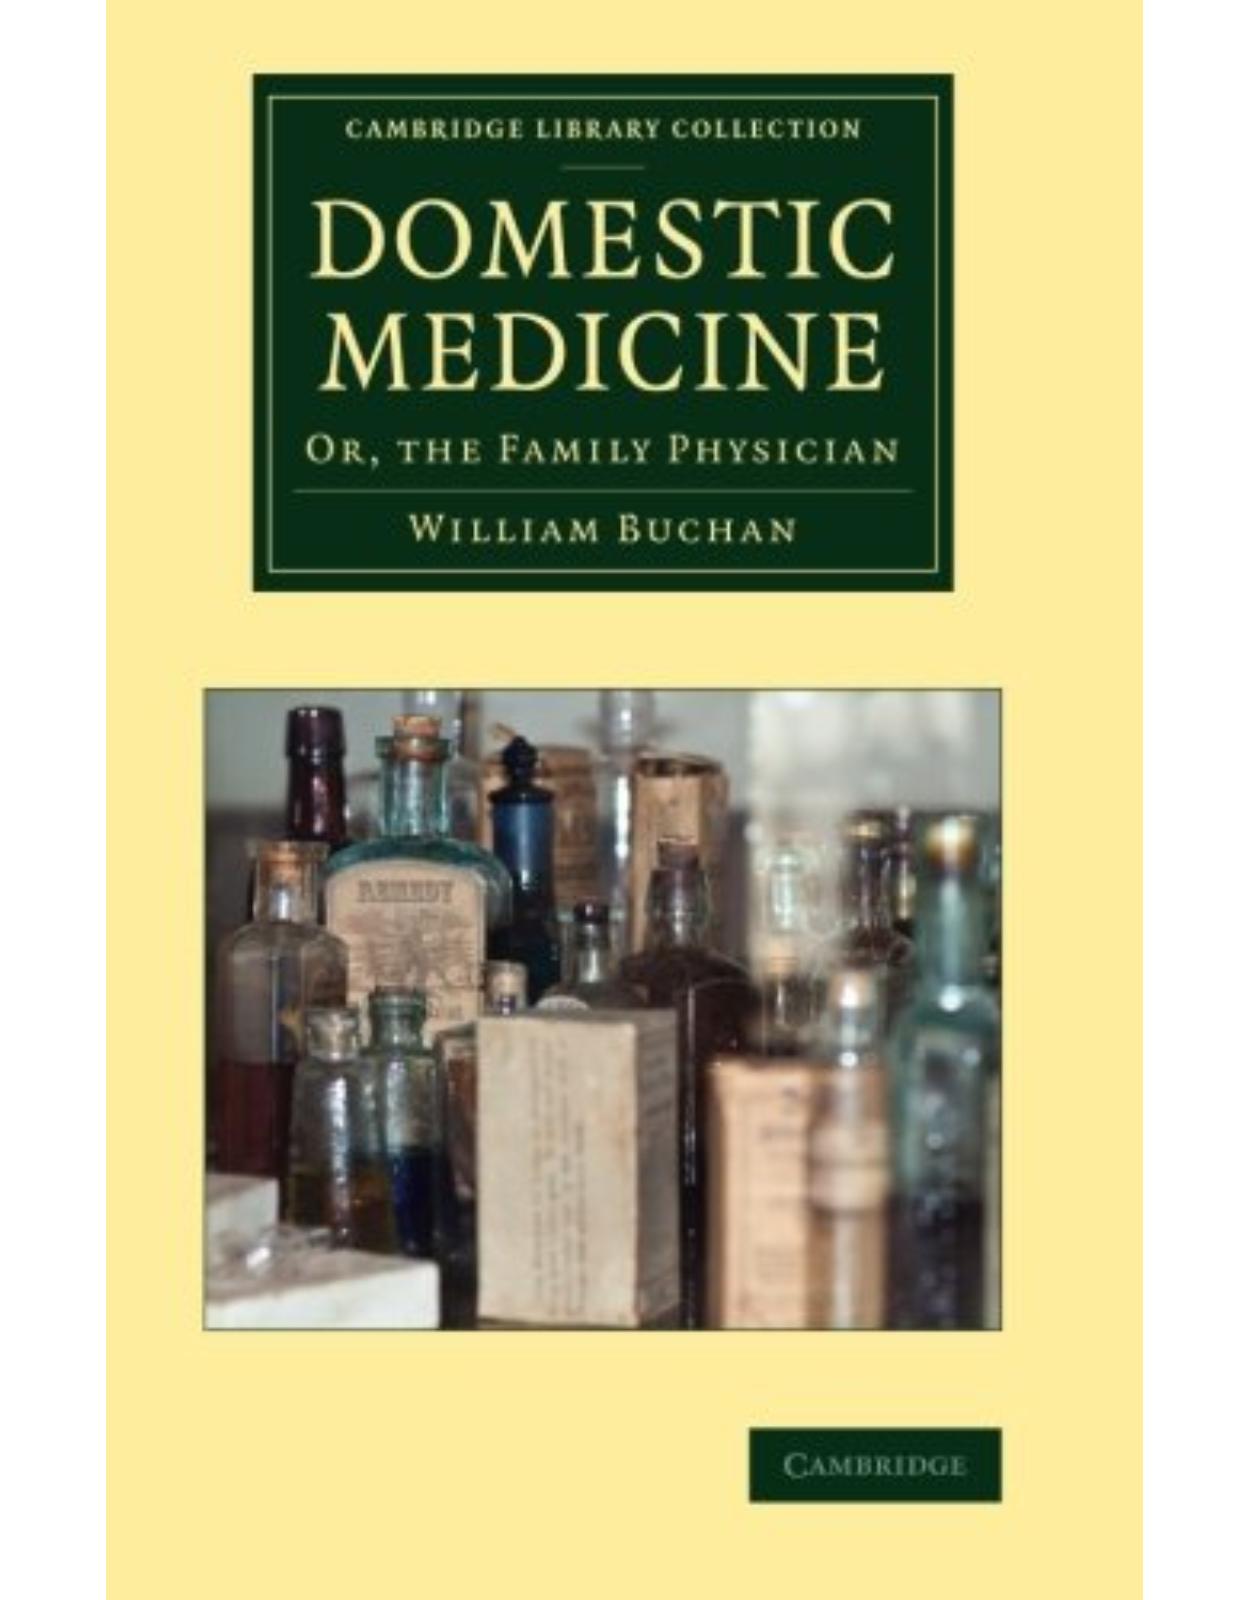 Domestic Medicine: Or, The Family Physician (Cambridge Library Collection - History of Medicine)